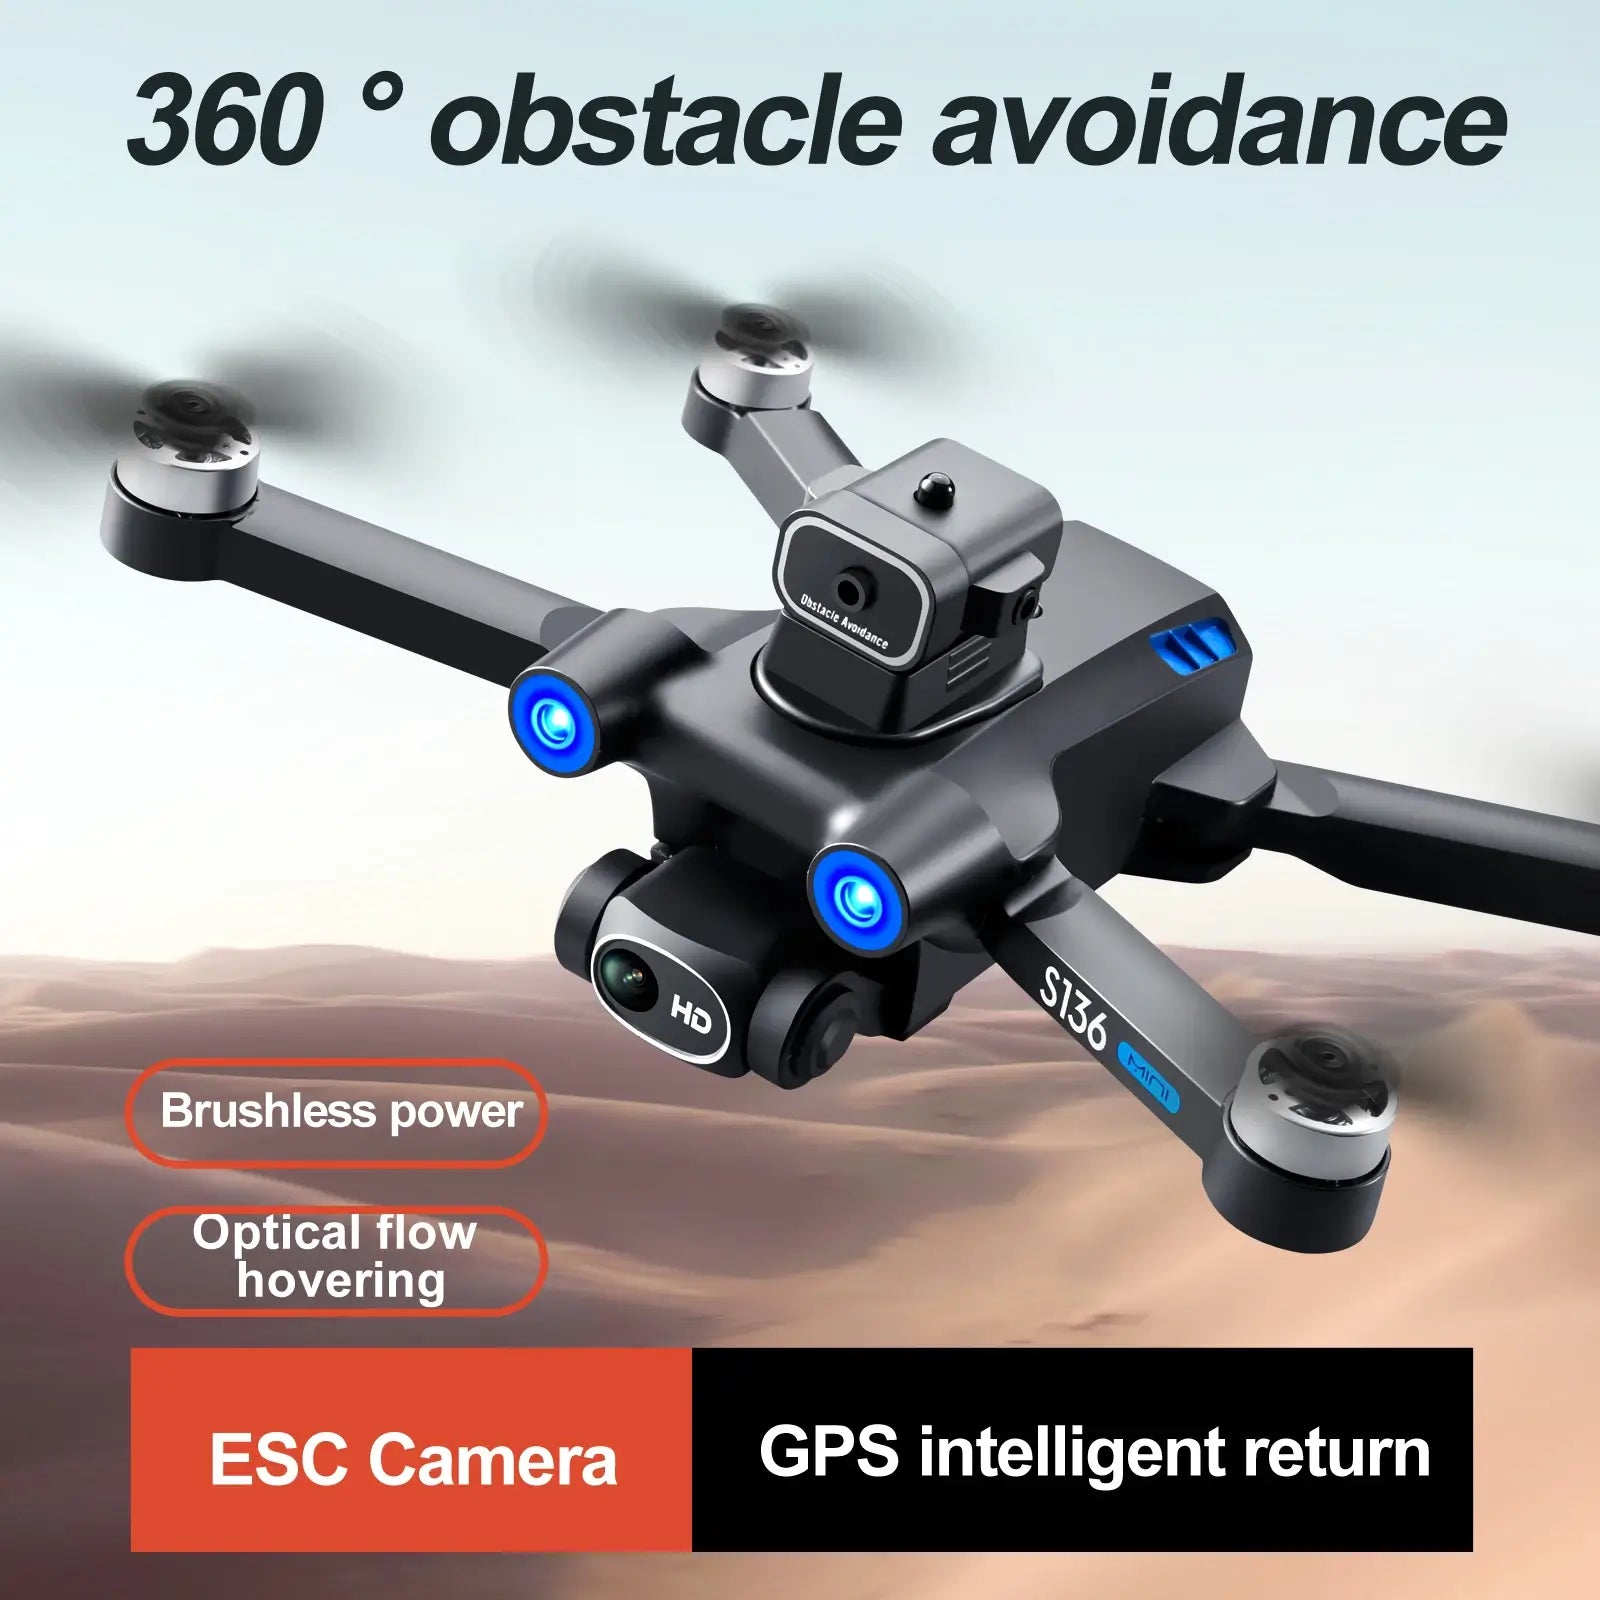 GPS-enabled quadcopter